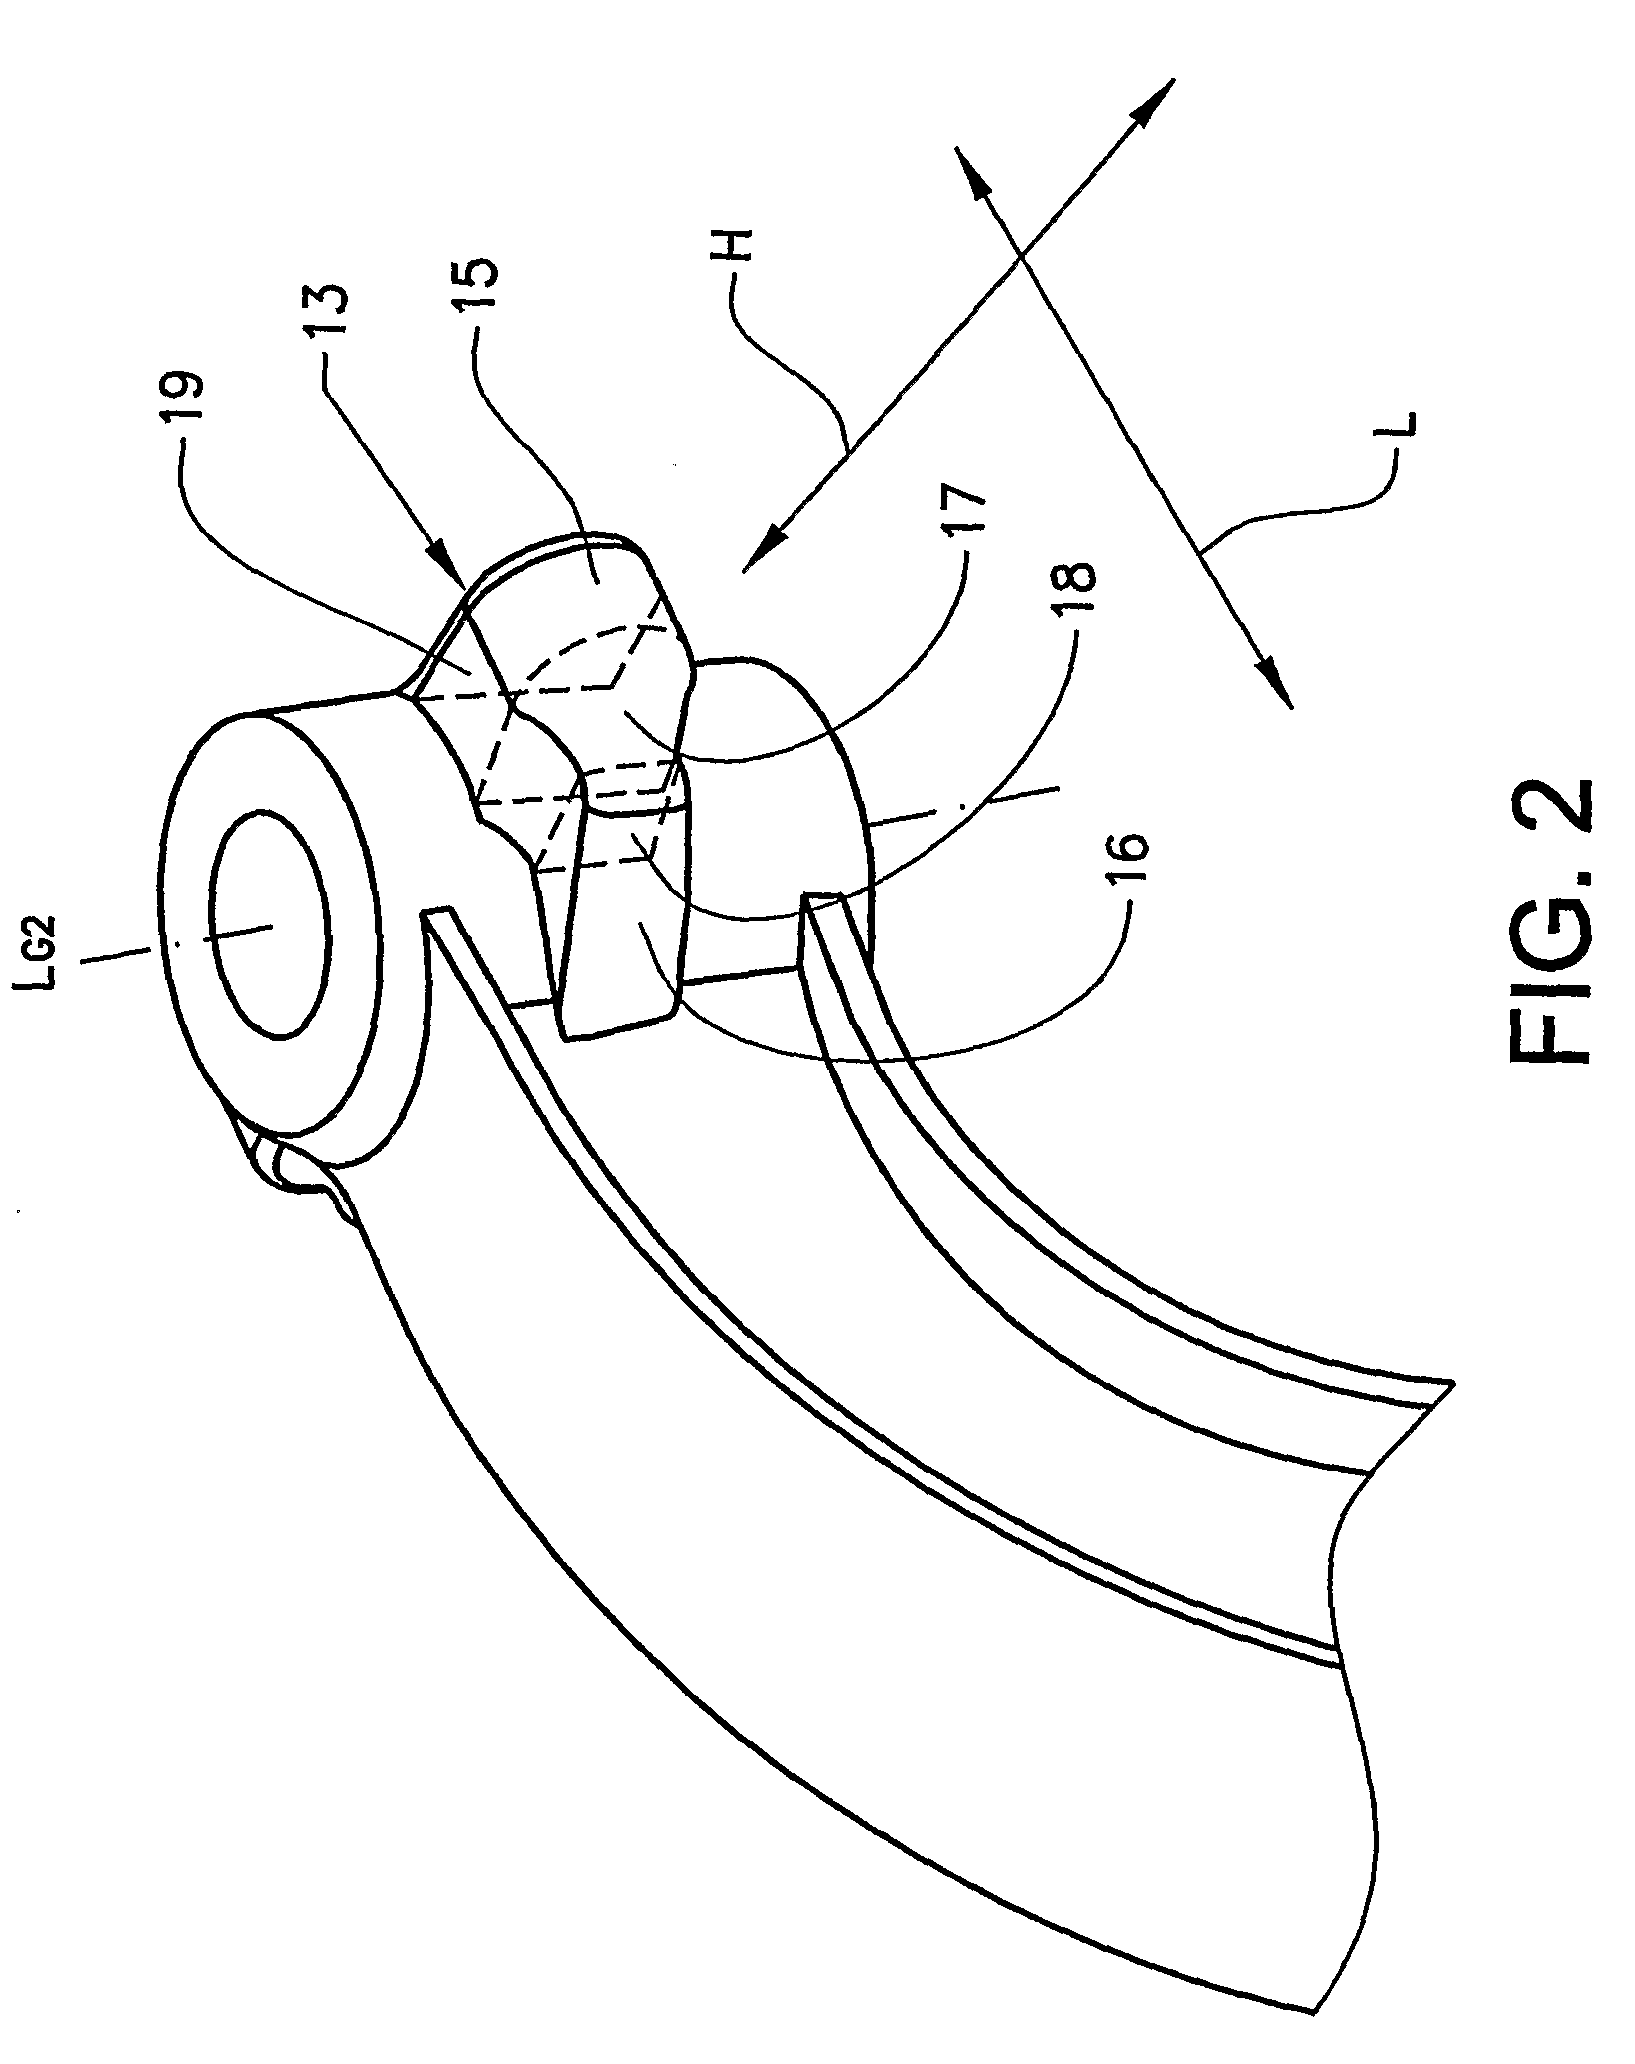 Blank For an Axle Beam, Wheel Suspension Comprising an Axle and a Method For Manufacturing an Axle